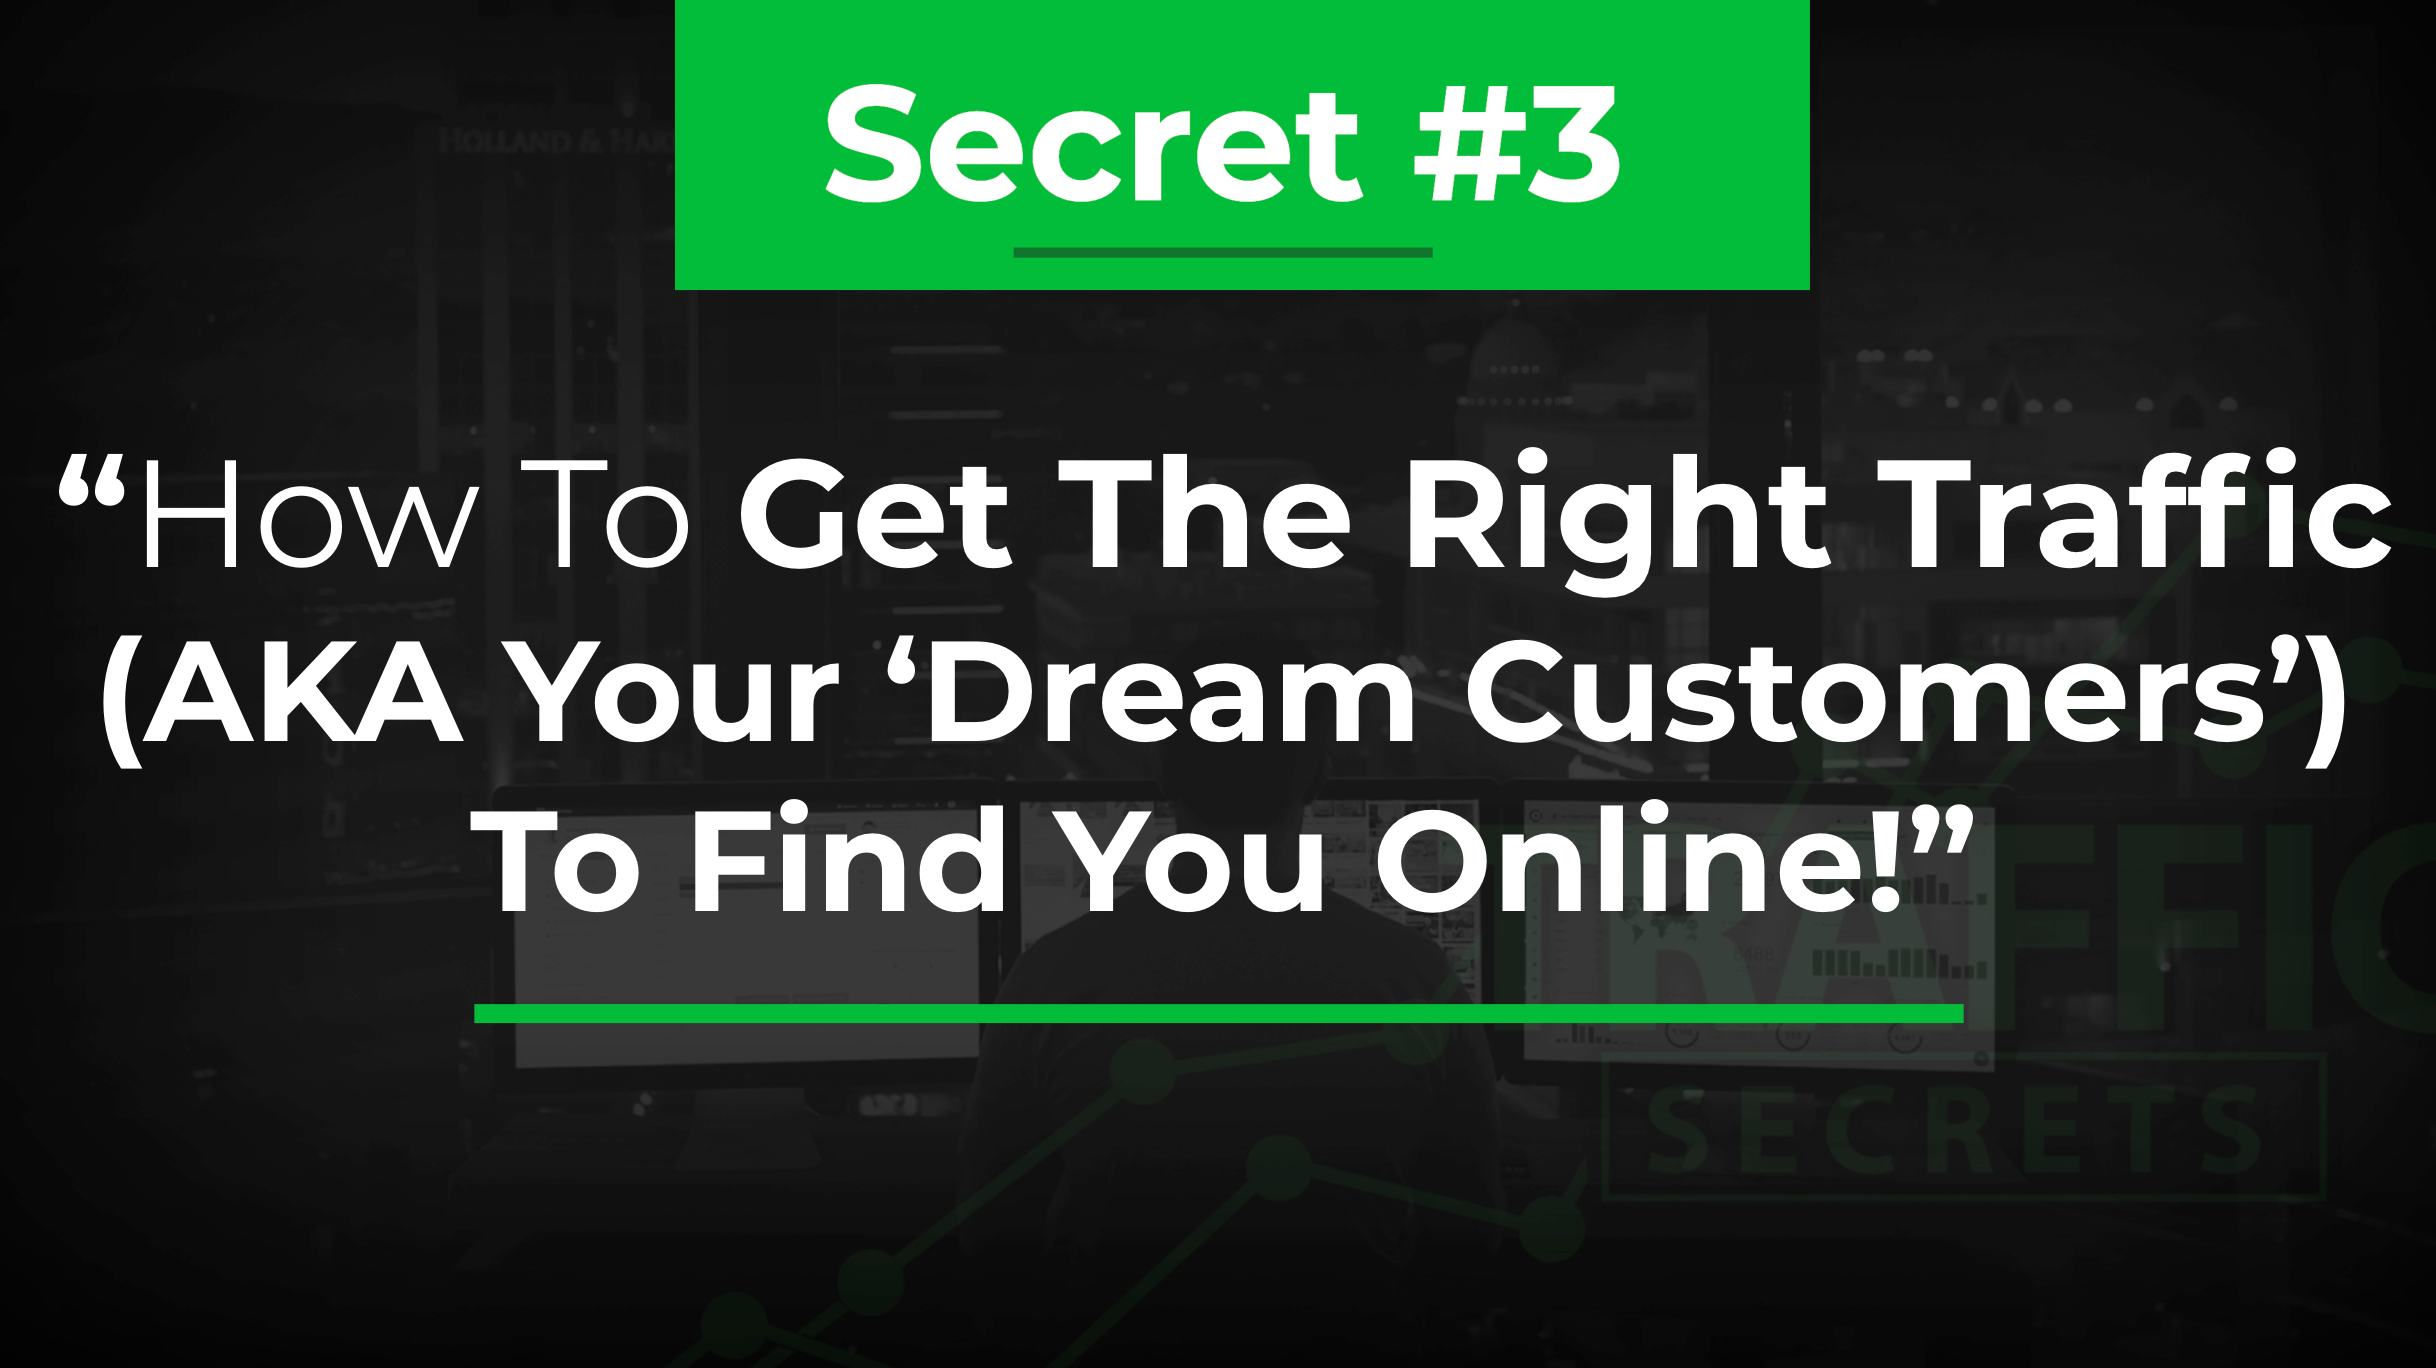 Secret #3 how to get the right traffic (AKA your 'dream customers') to find you online!